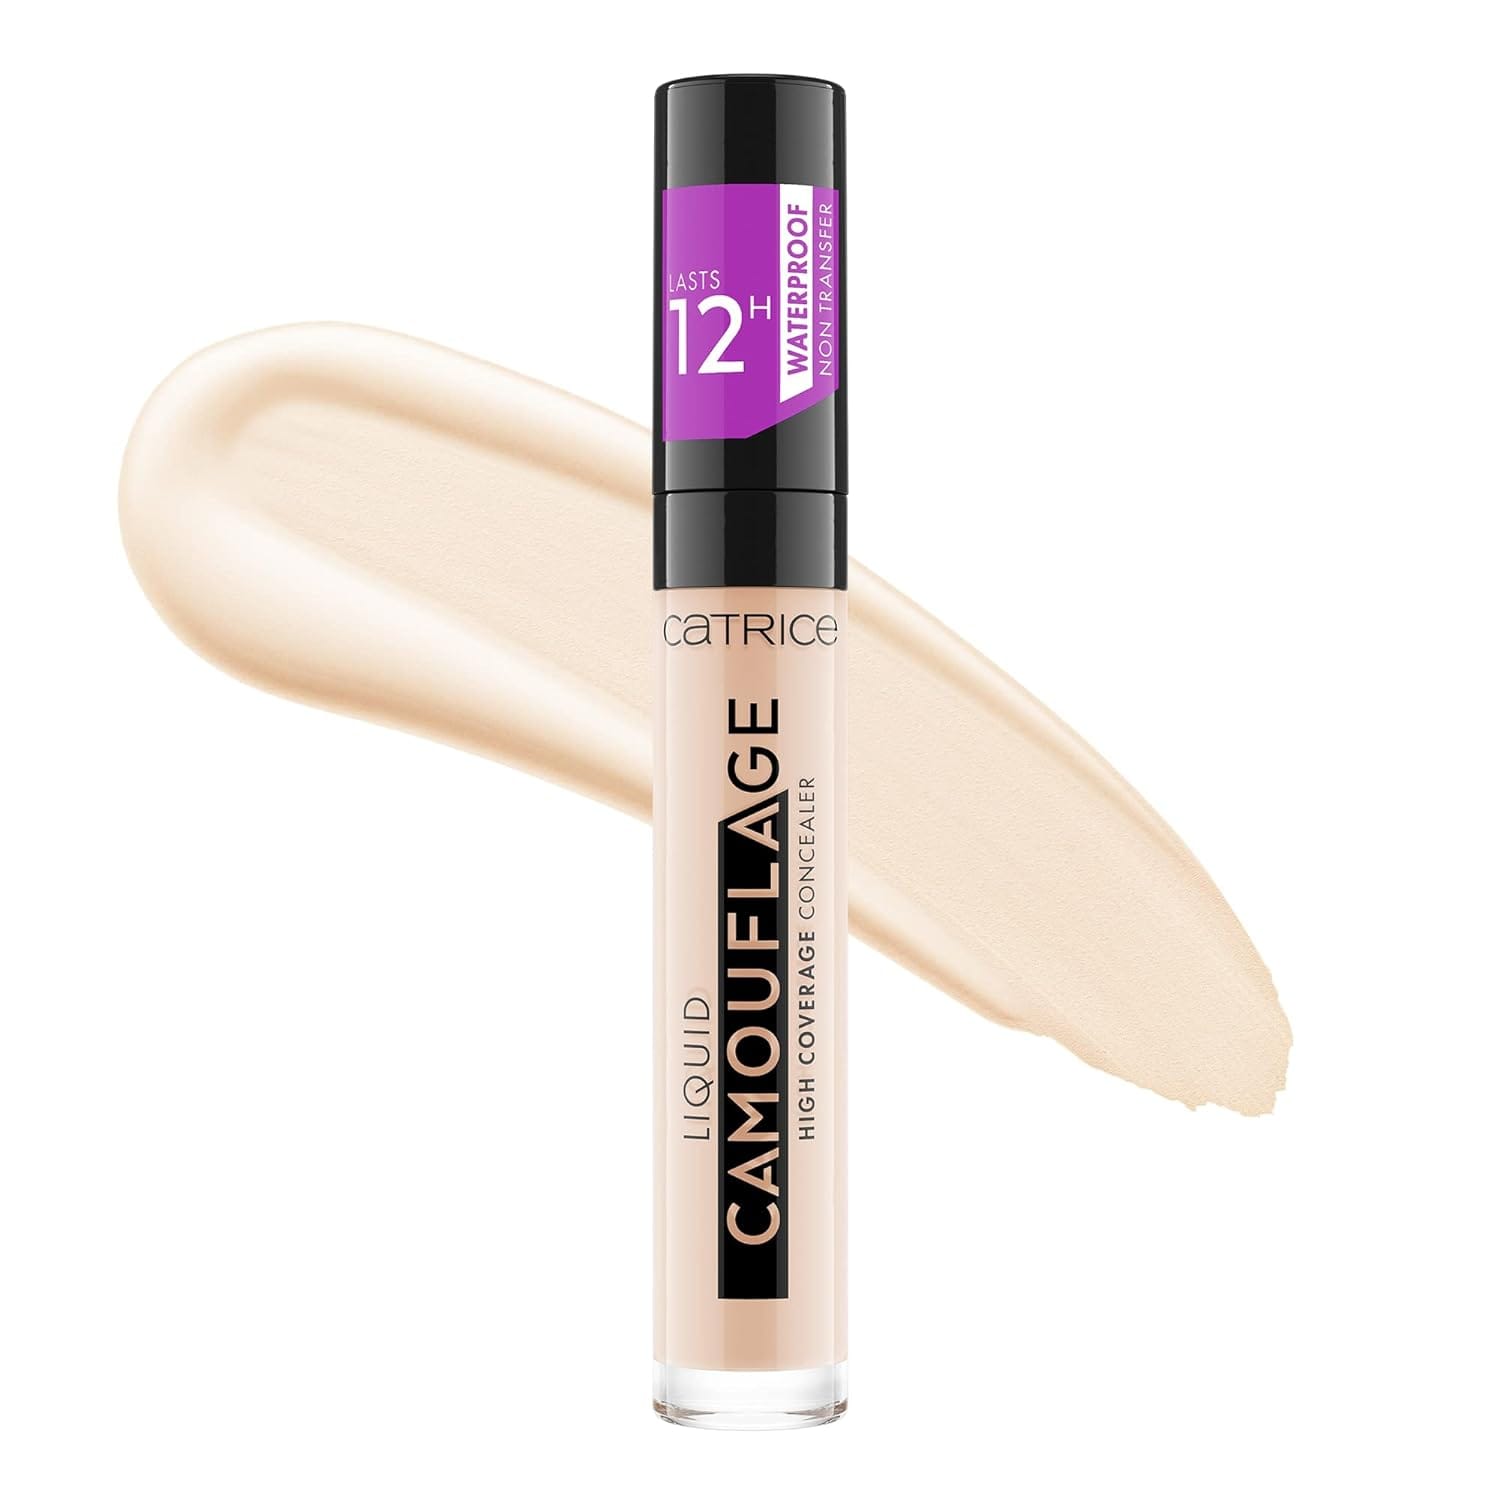 Catrice Liquid Camouflage High Coverage Concealer Review